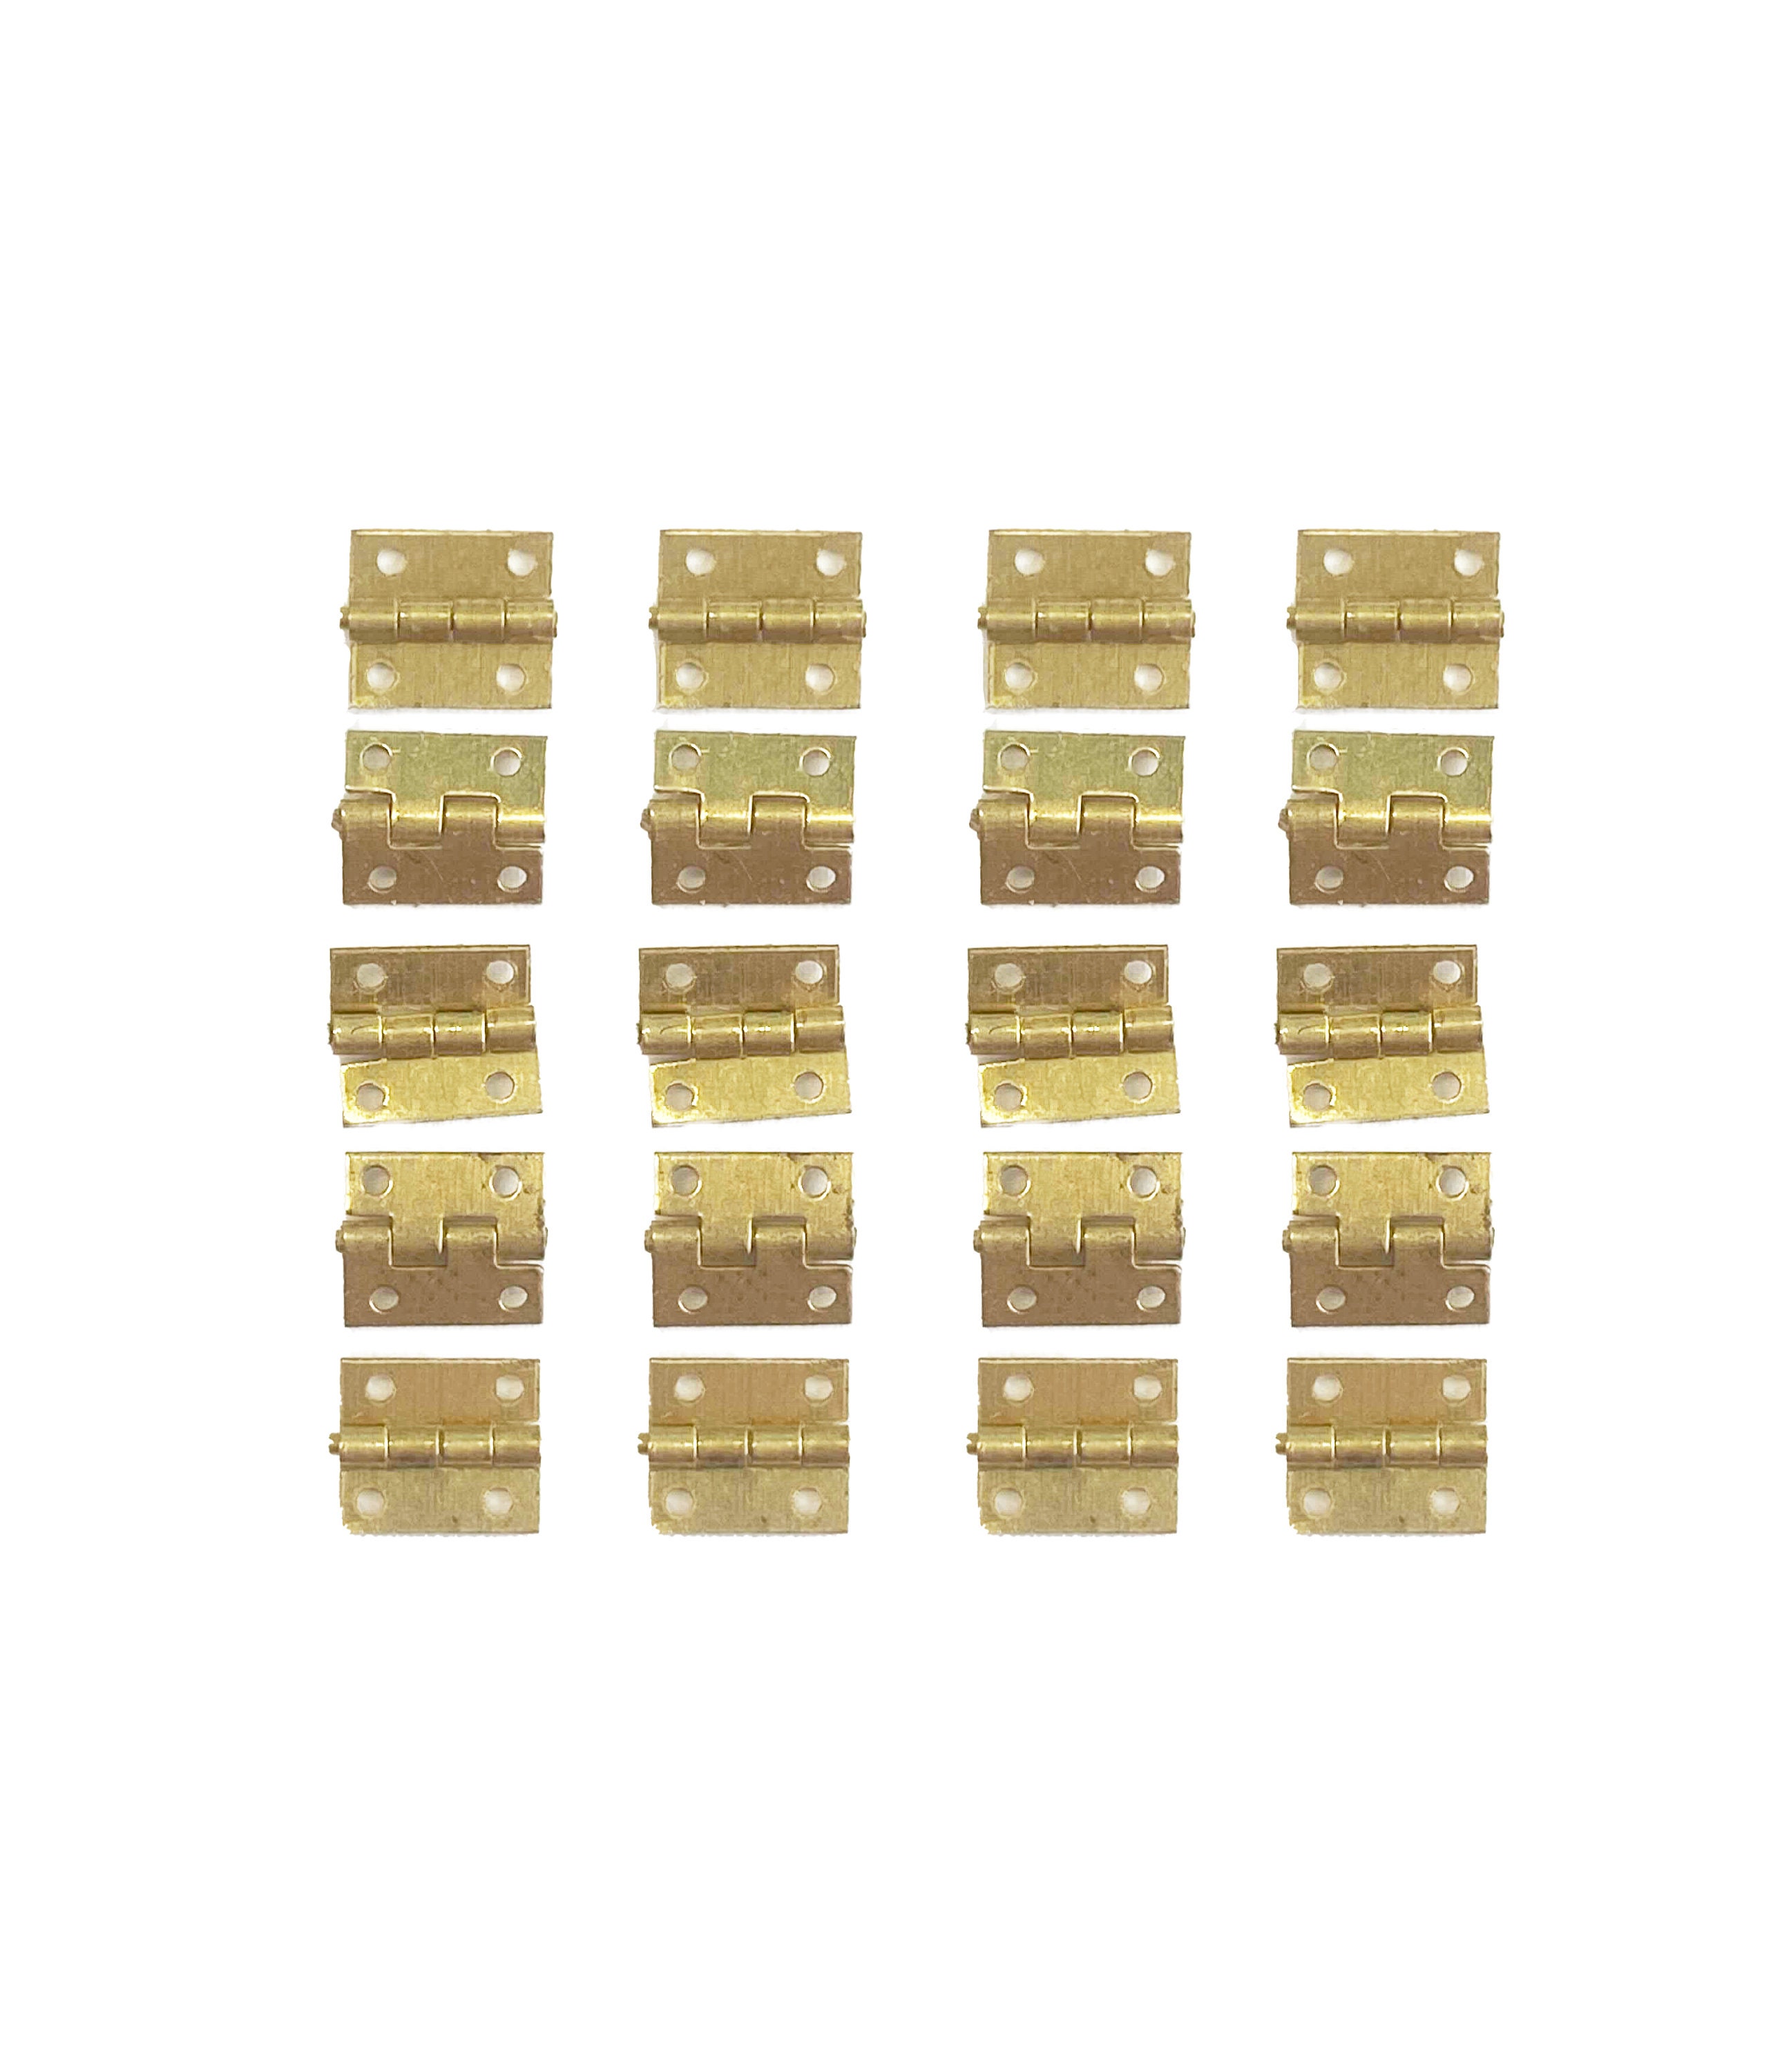 Set Of 20 Mini Brass Column Hinges For Cigar Box Gold Decor 5 15mm, 274g  From Yq5664, $13.06